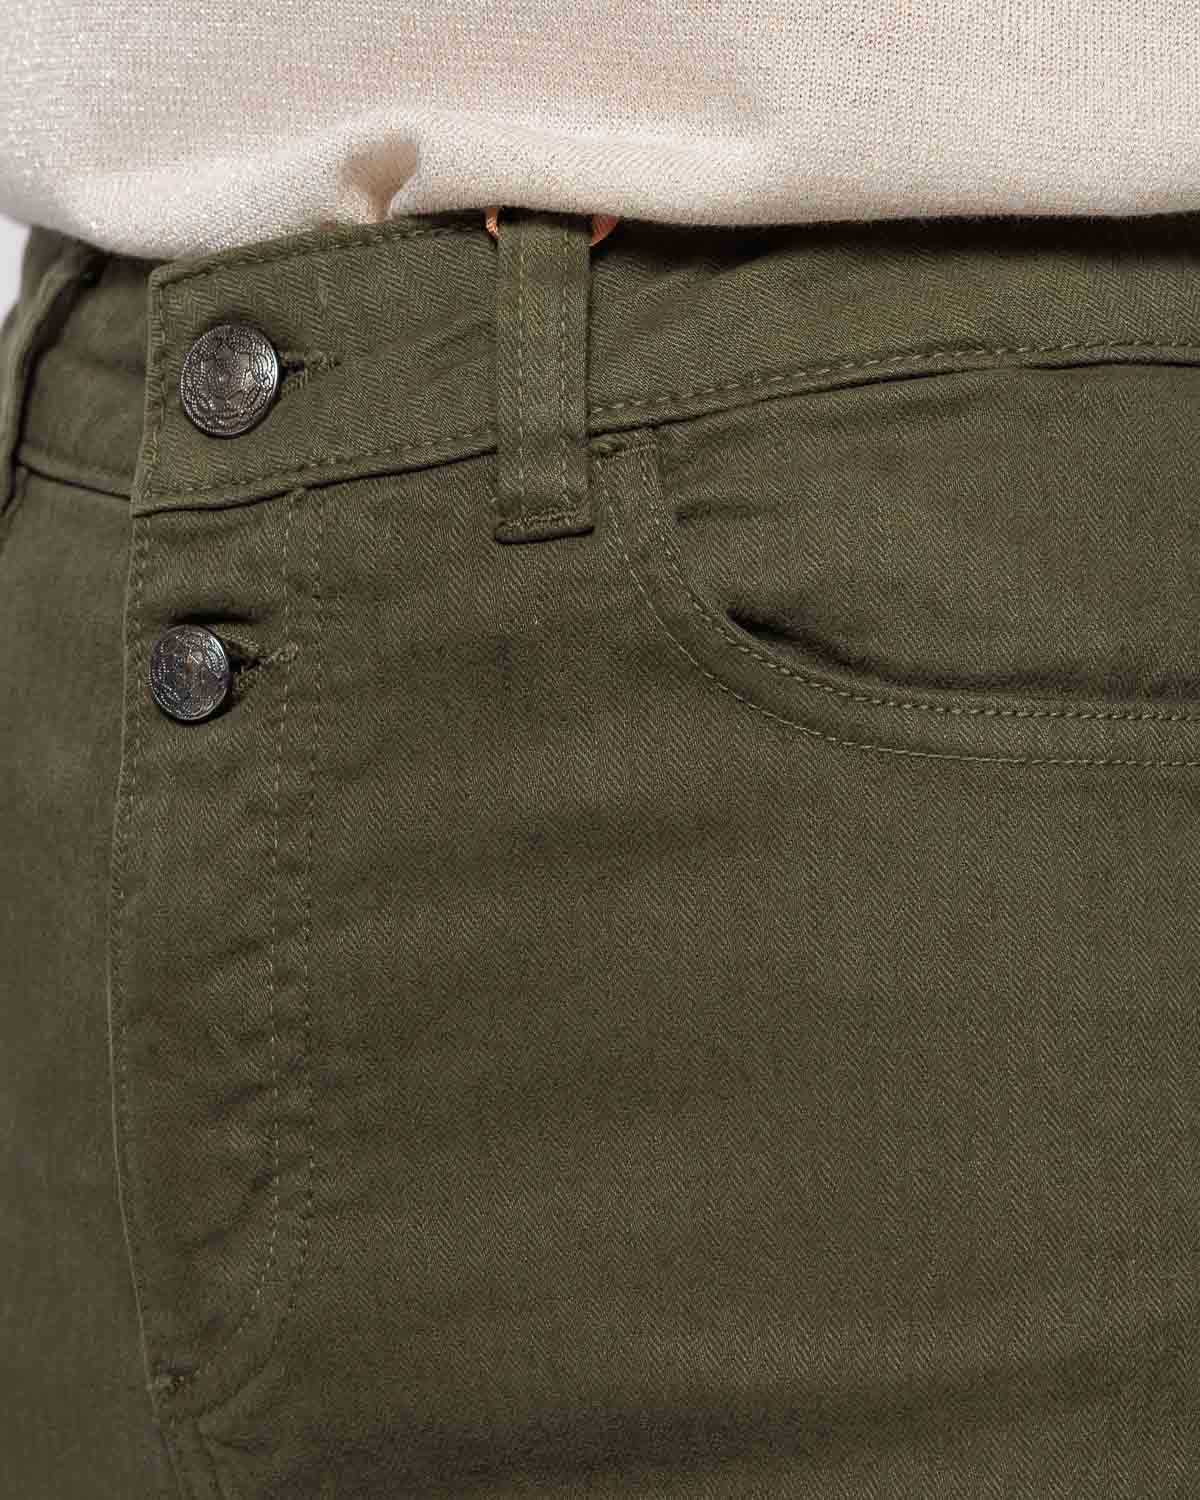 Mos Mosh Adeline Cargo Pants in Forest Night